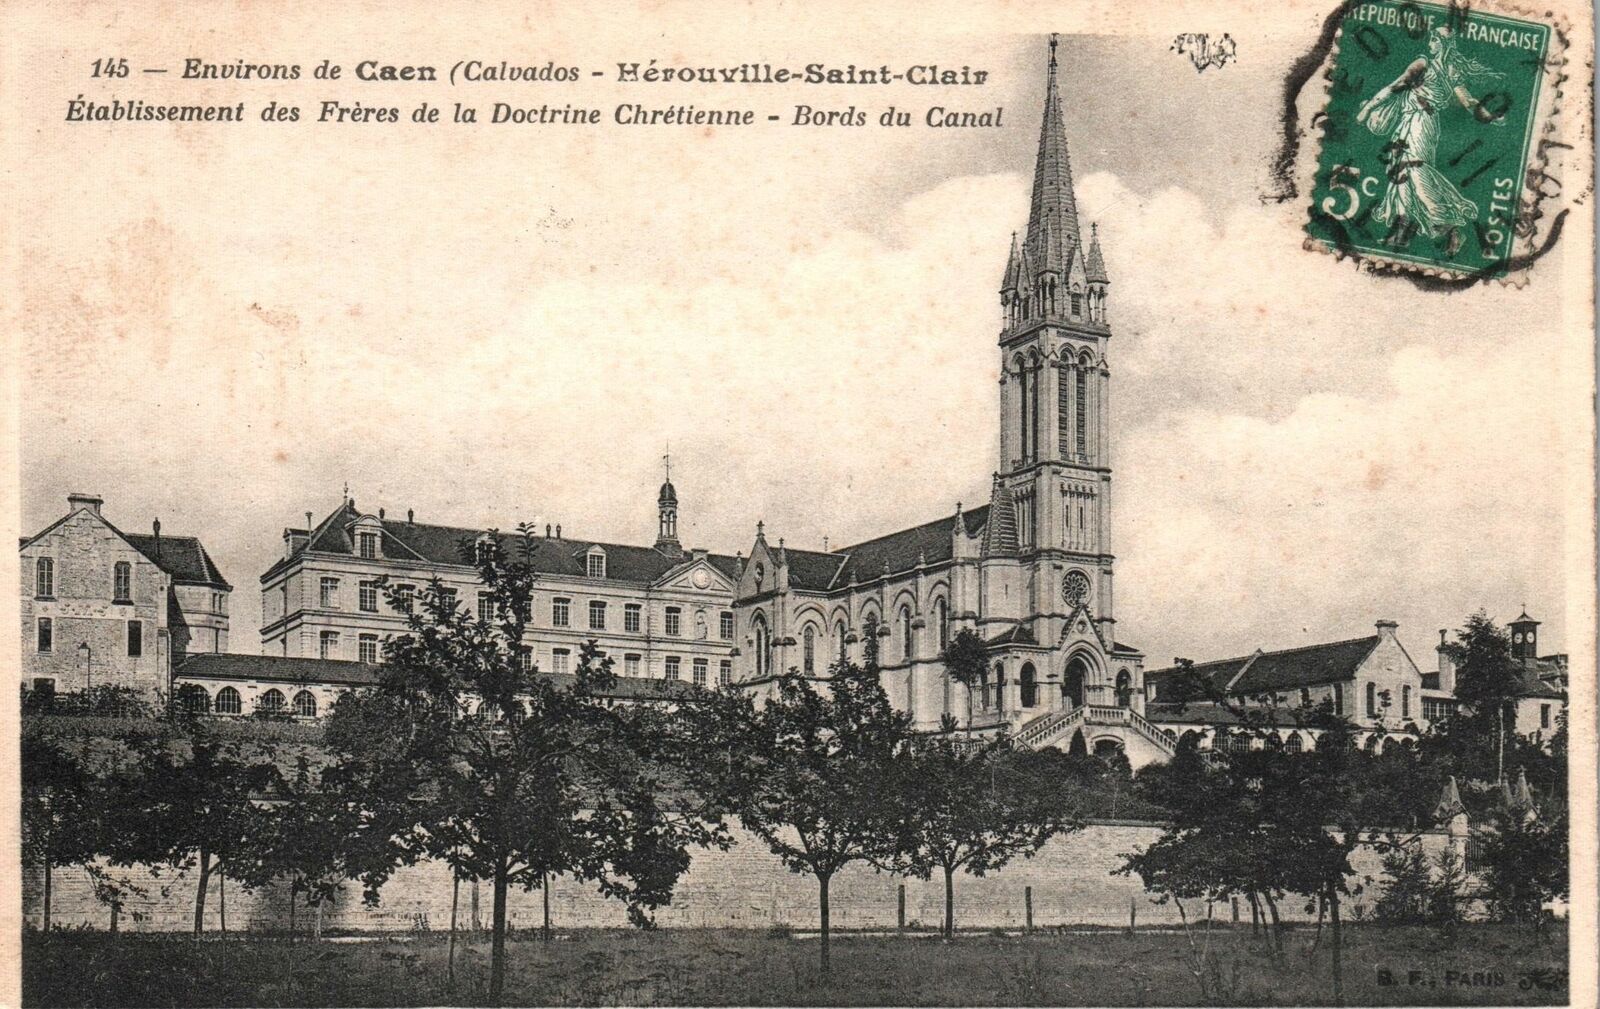 VINTAGE POSTCARD GARDENS AND SURROUNDS AT THE CHURCH COMPLEX IN CAEN FRANCE 1907